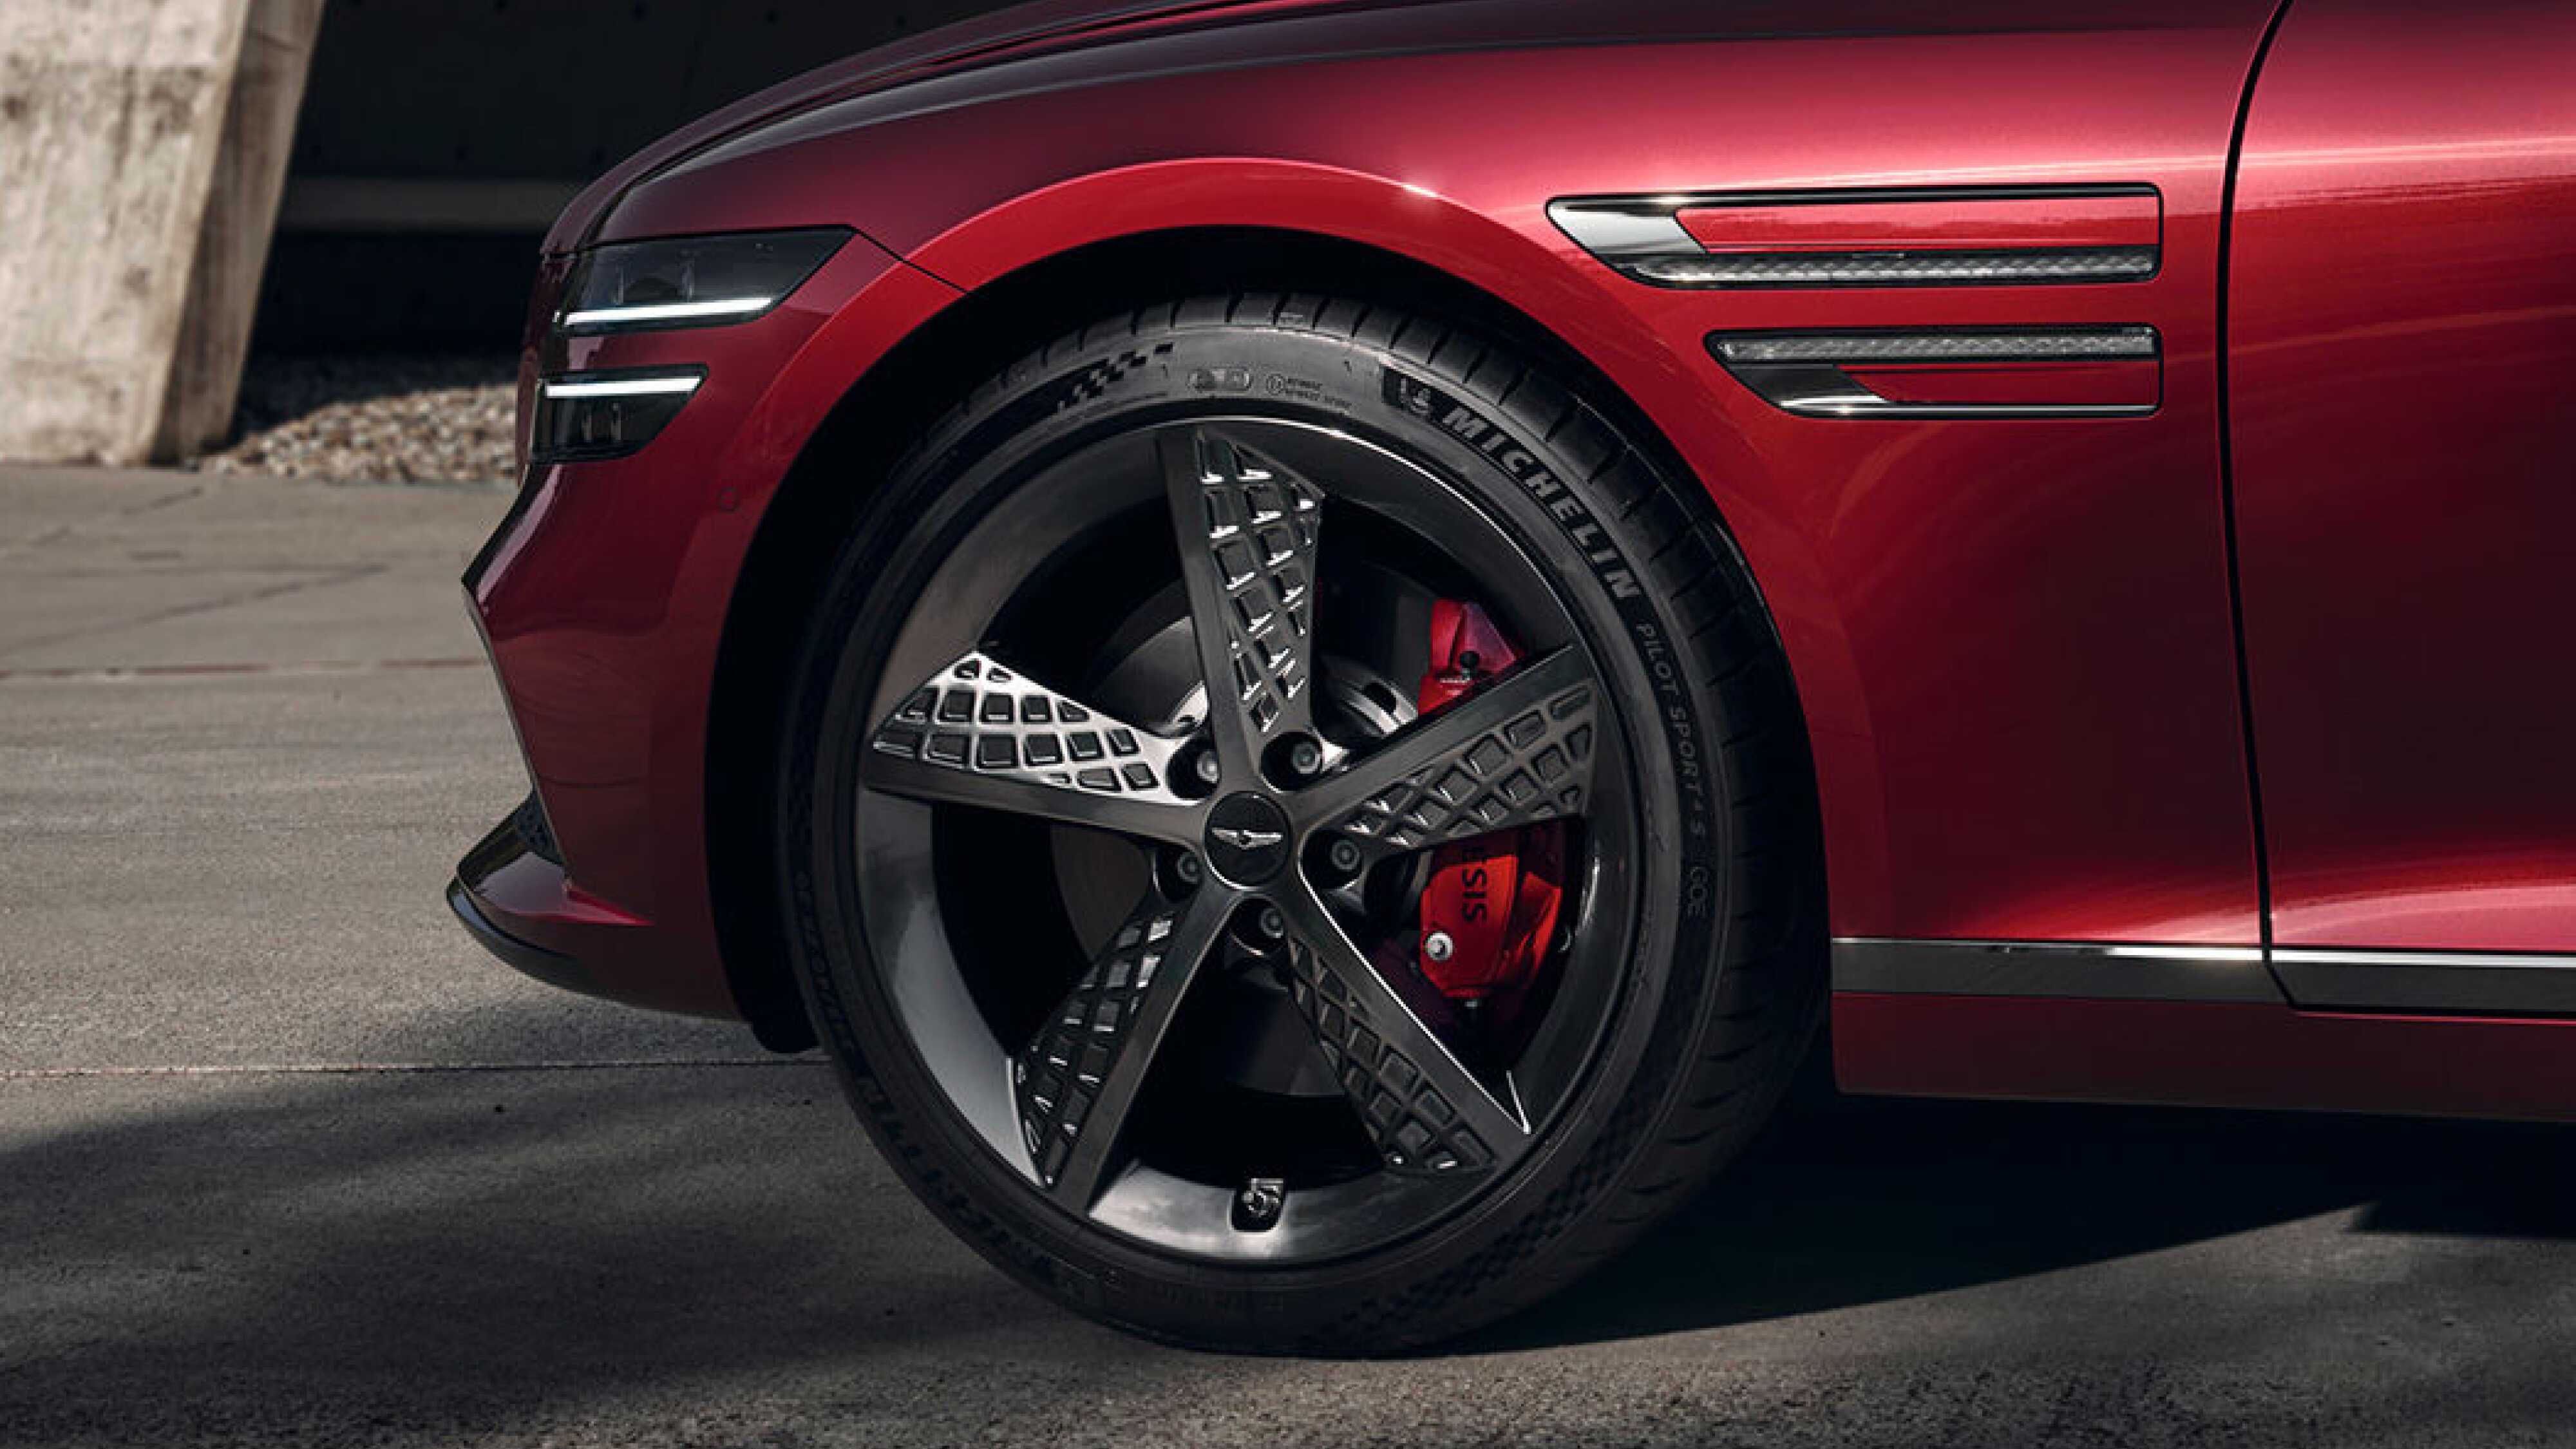 Front wheel and brake caliper of the Genesis G80 Sport